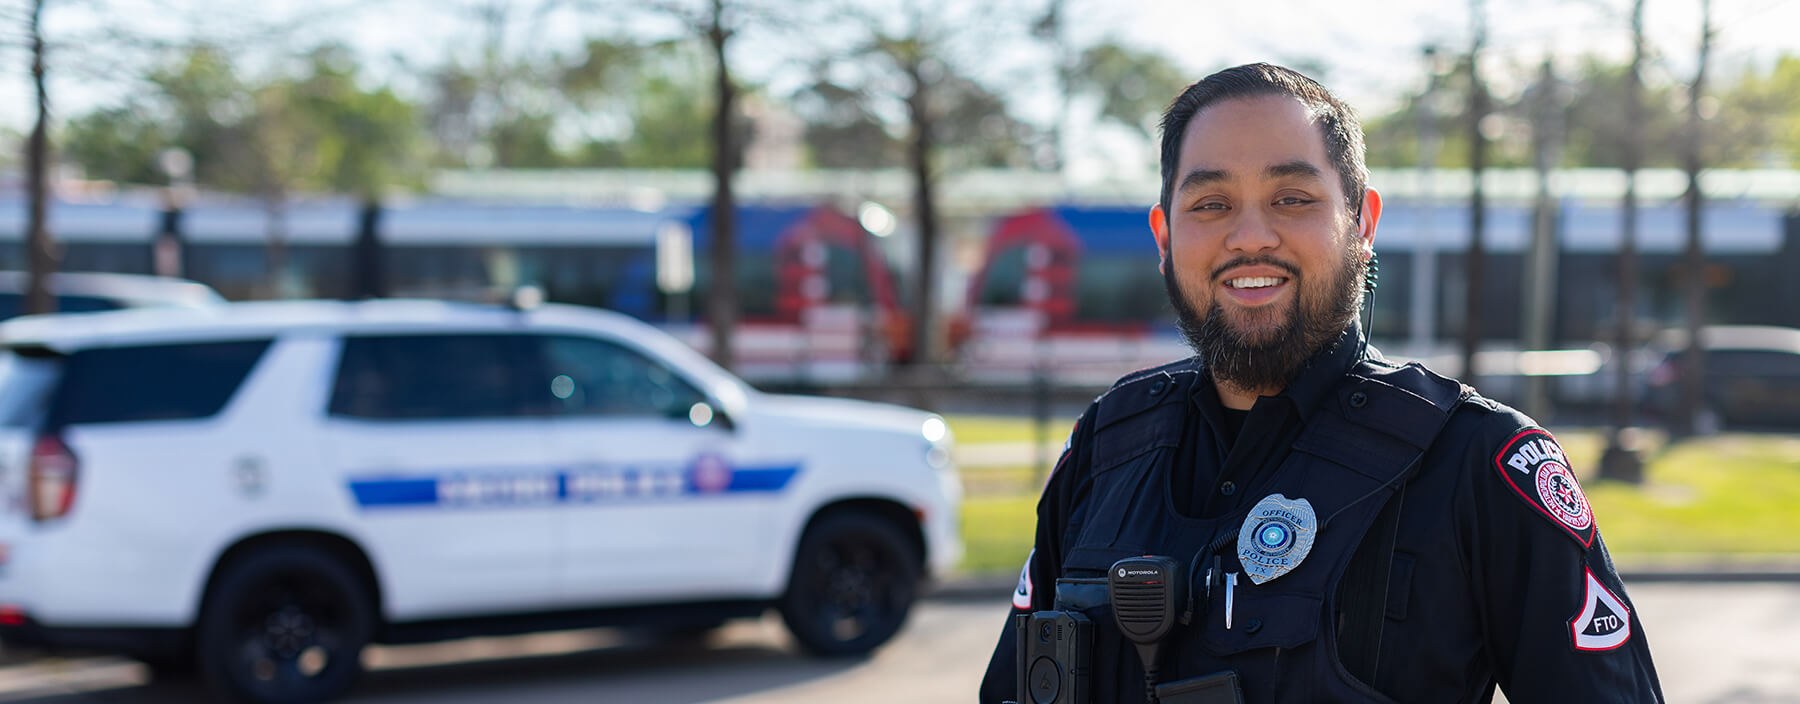 METRO police officer smiling with METRO police car and rail in the background